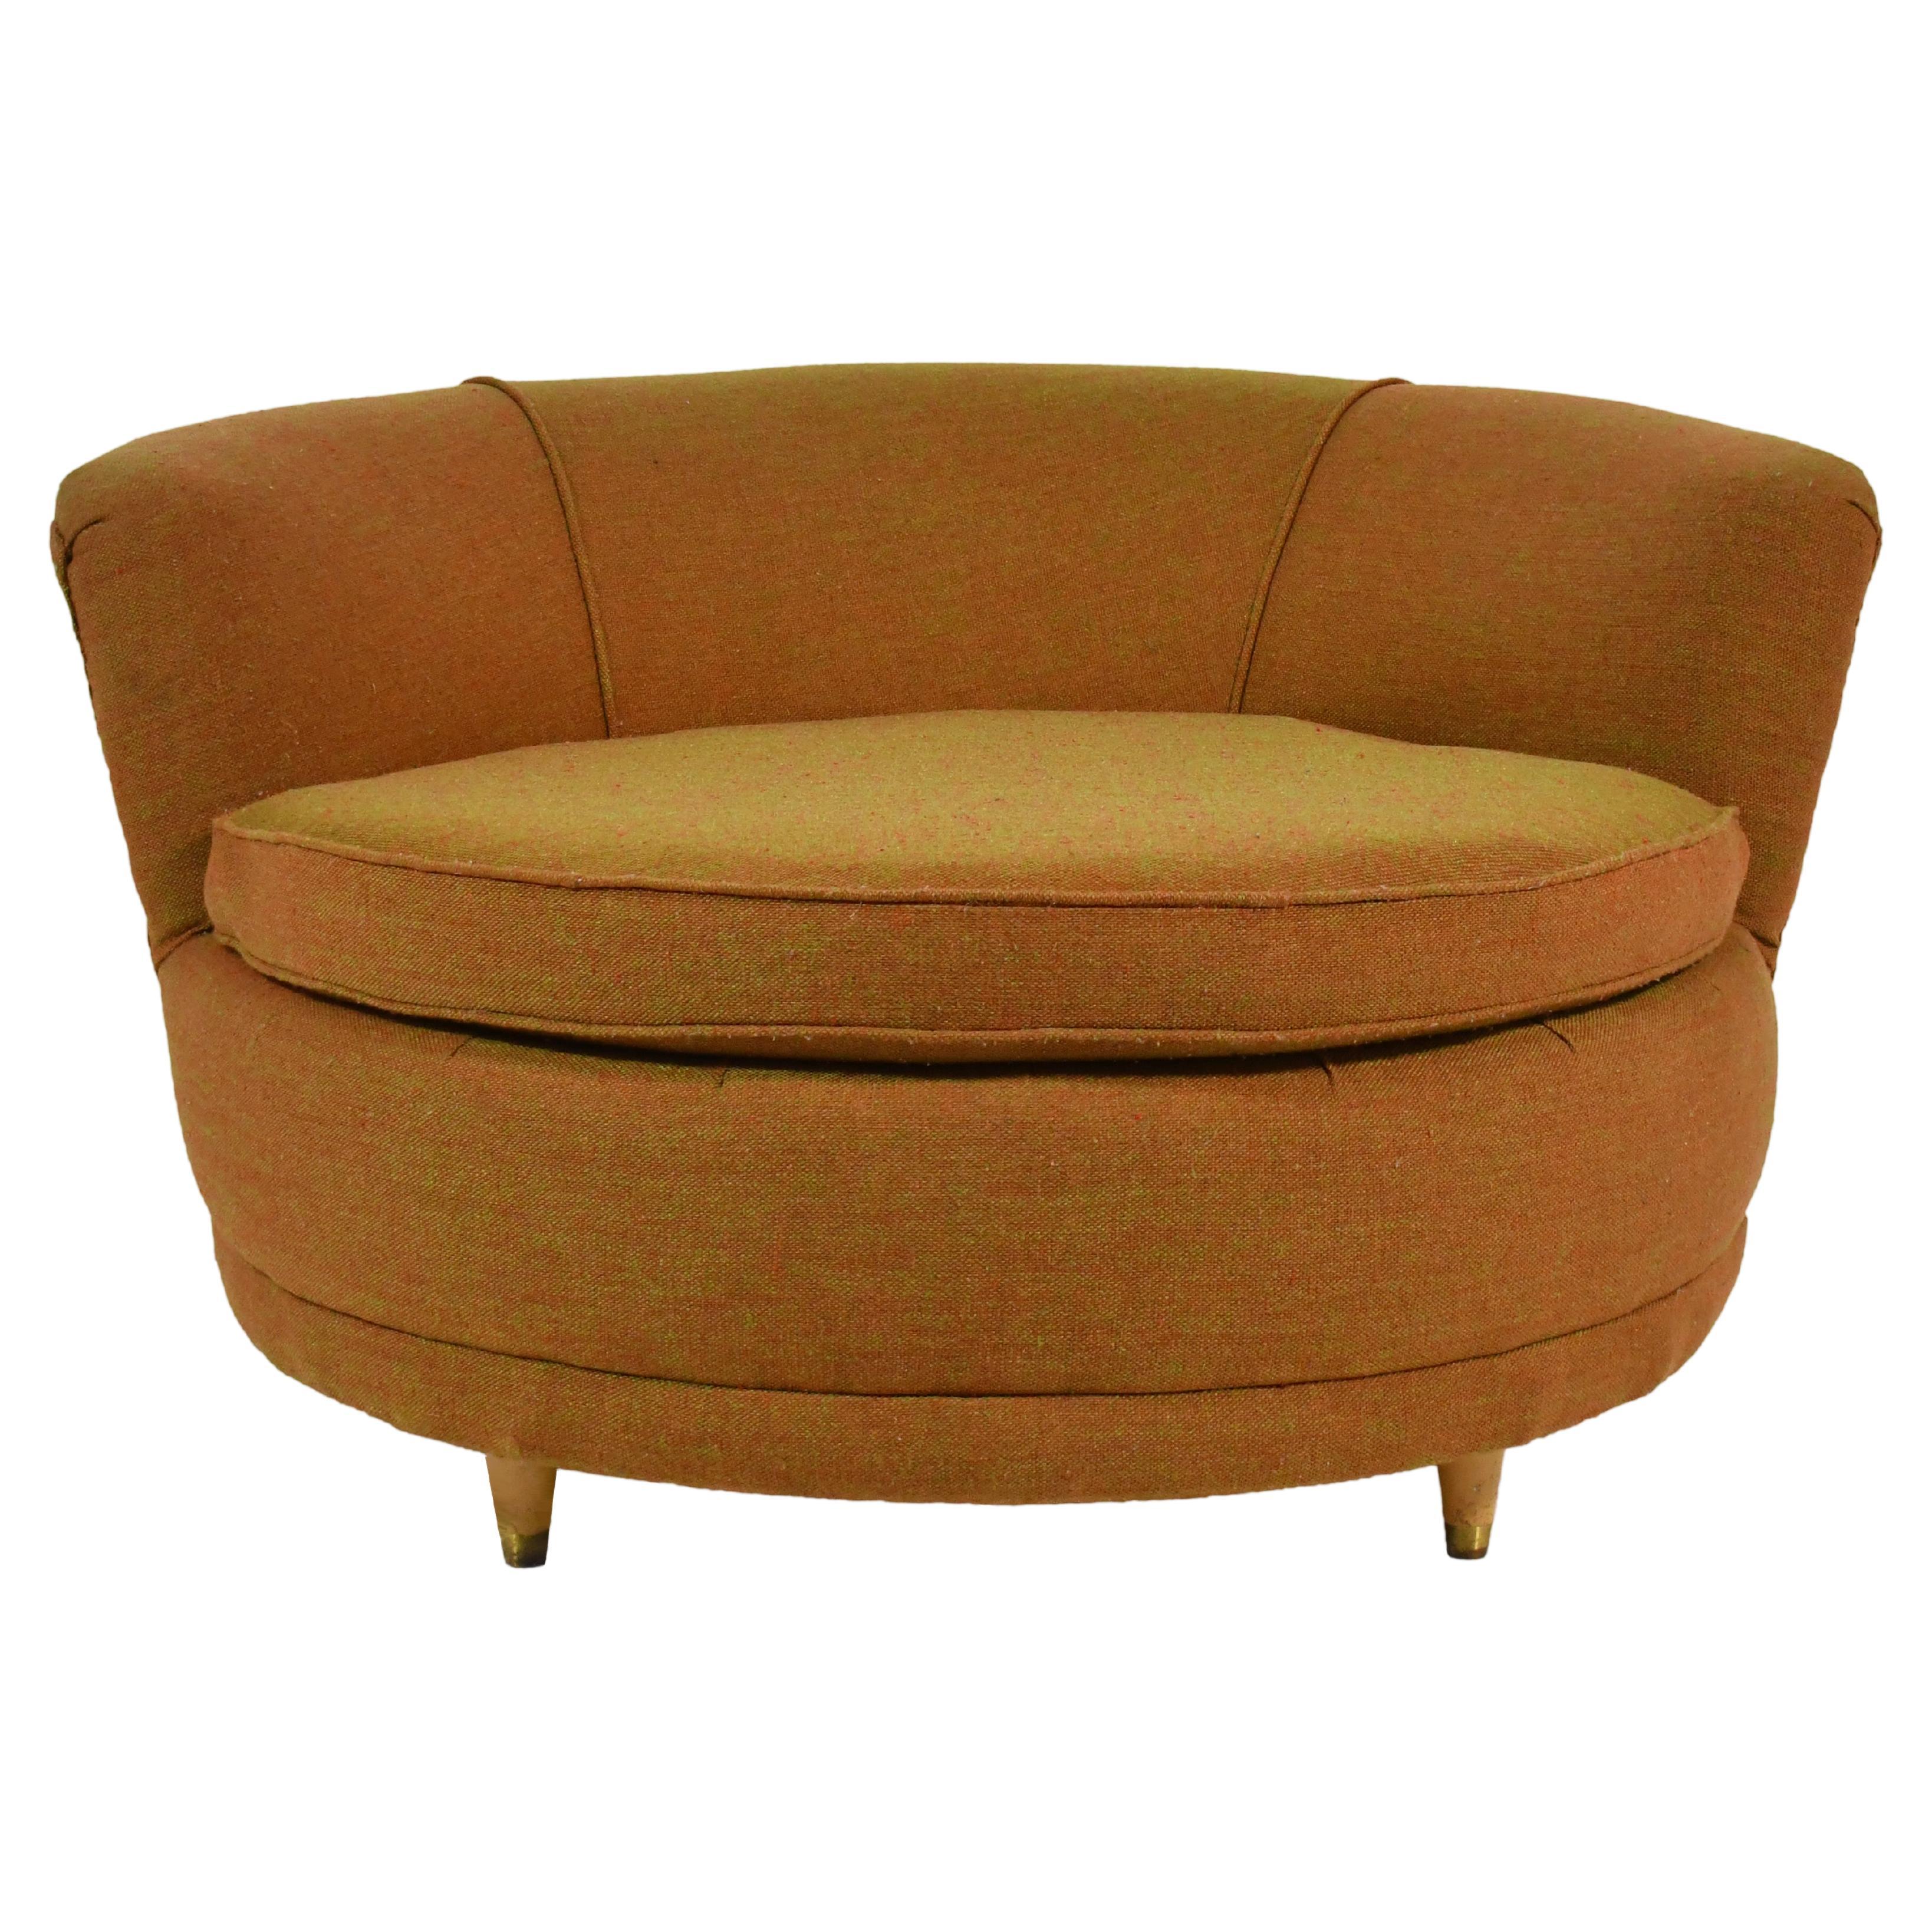 Large Round Parlor Chair by Howard